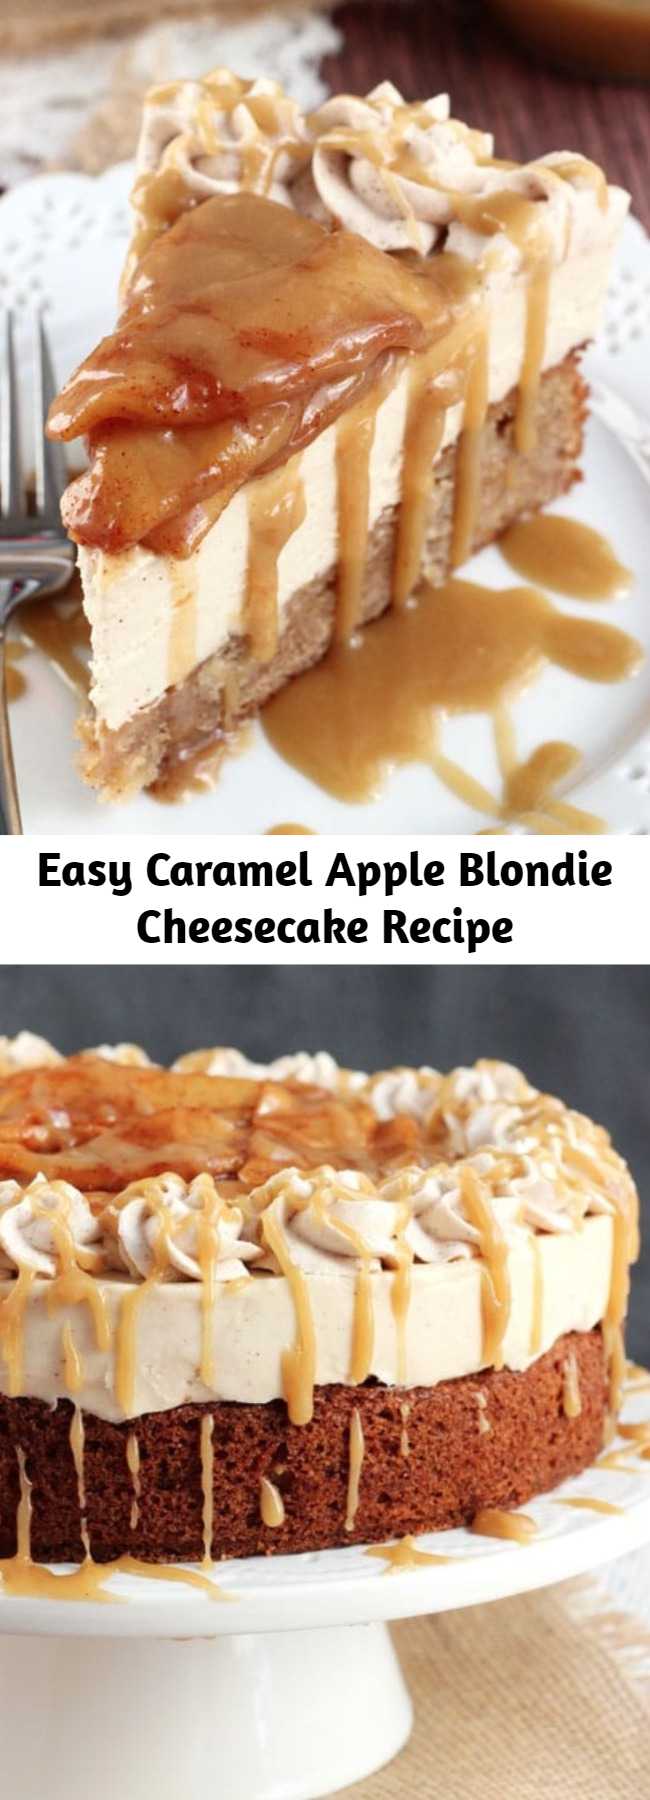 Easy Caramel Apple Blondie Cheesecake Recipe - This Caramel Apple Blondie Cheesecake is pure caramel apple heaven, I kid you not. It has layers of apple spice blondie and no-bake caramel cheesecake, and it’s topped with cinnamon apples and caramel sauce!